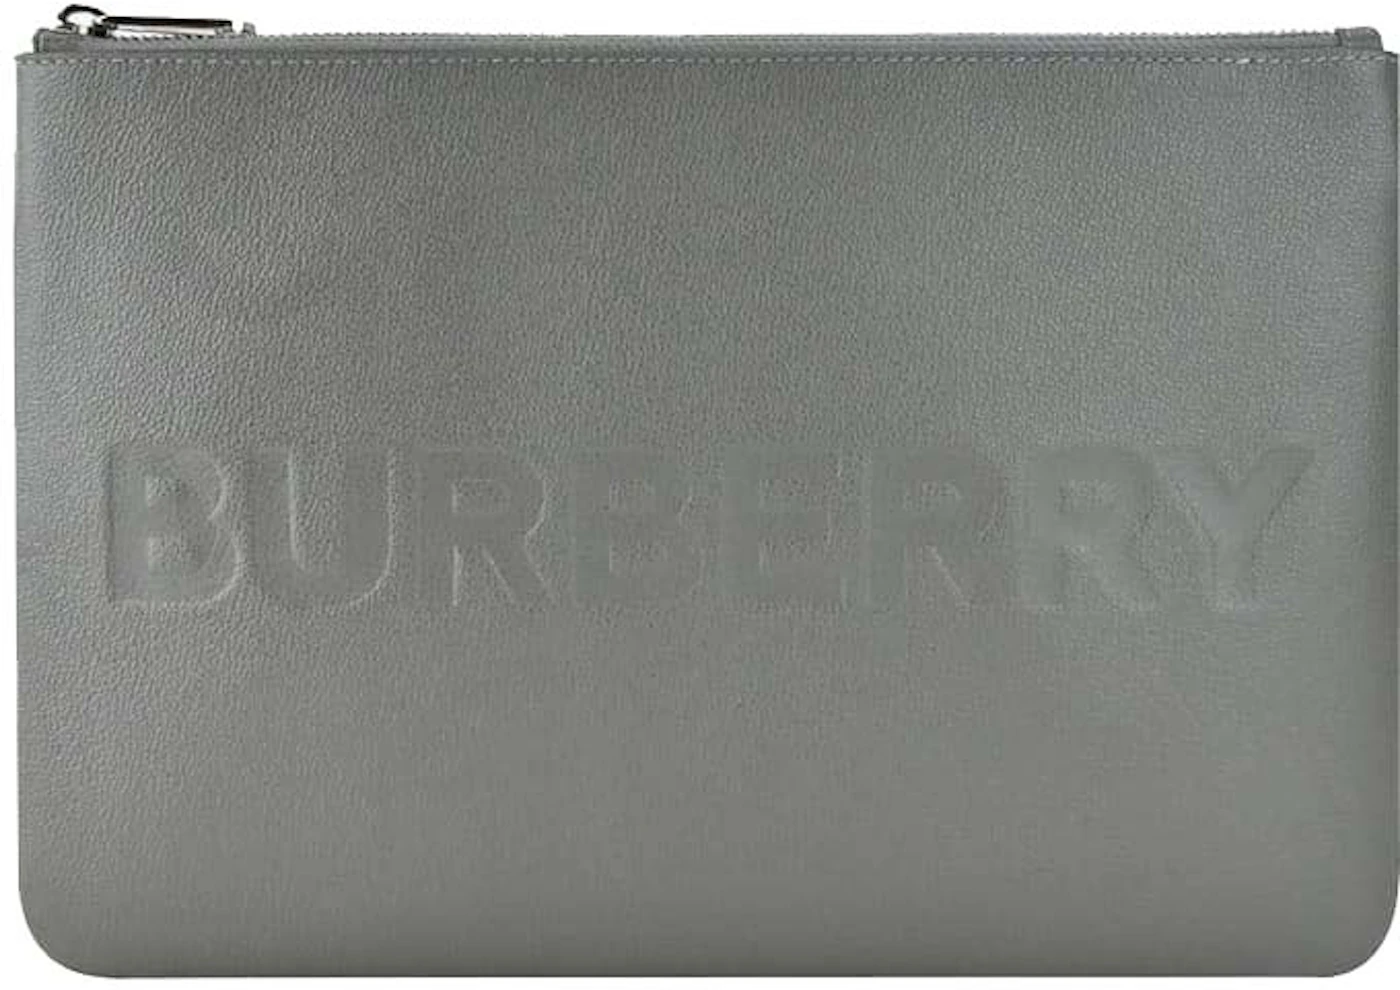 Burberry Embossed Leather Pouch Charcoal Grey